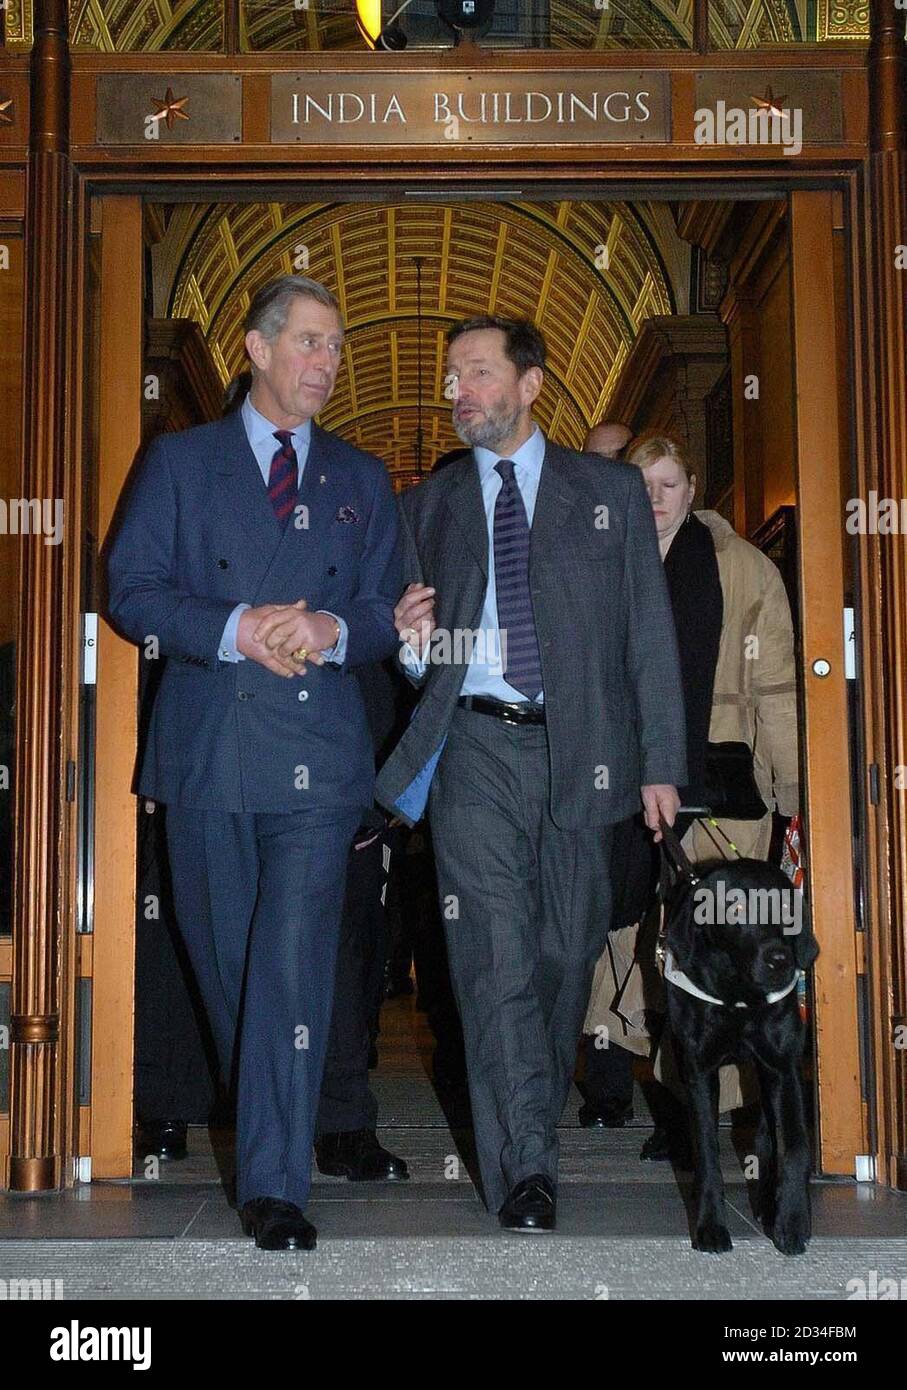 A file Picture of the Prince Charles and Home Secretary David Blunkett dated 24 November 2004..Work and Pensions Secretary Blunkett is to make a statement tonight October 31 2005 about the shares held in trust for his sons in the technology firm DNA Biosciences, Downing Street said today. Stock Photo